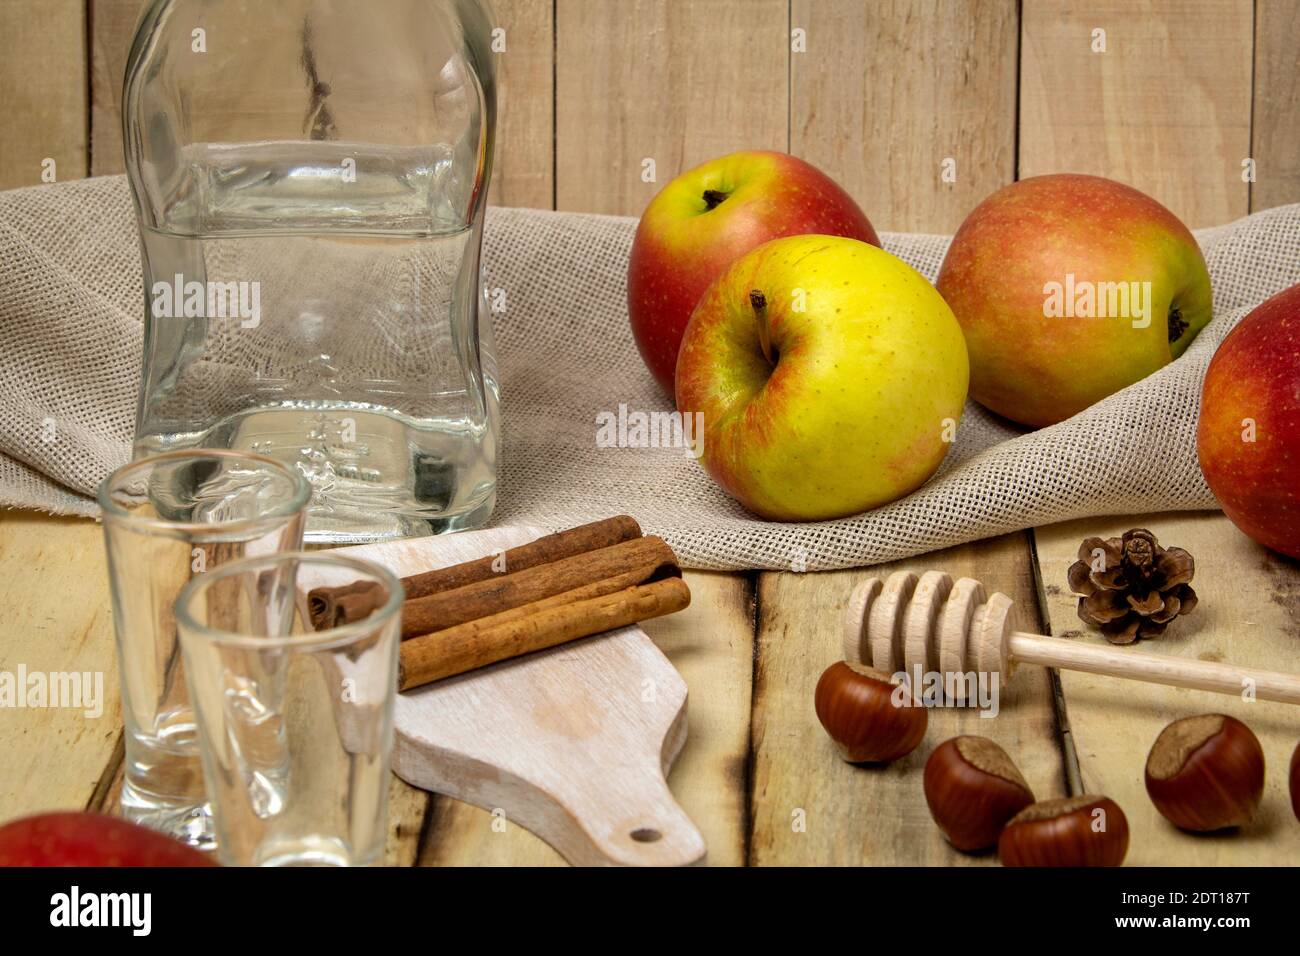 Natural homemade vodka made from apples and sugar. Homemade apple vodka grown in the garden Stock Photo